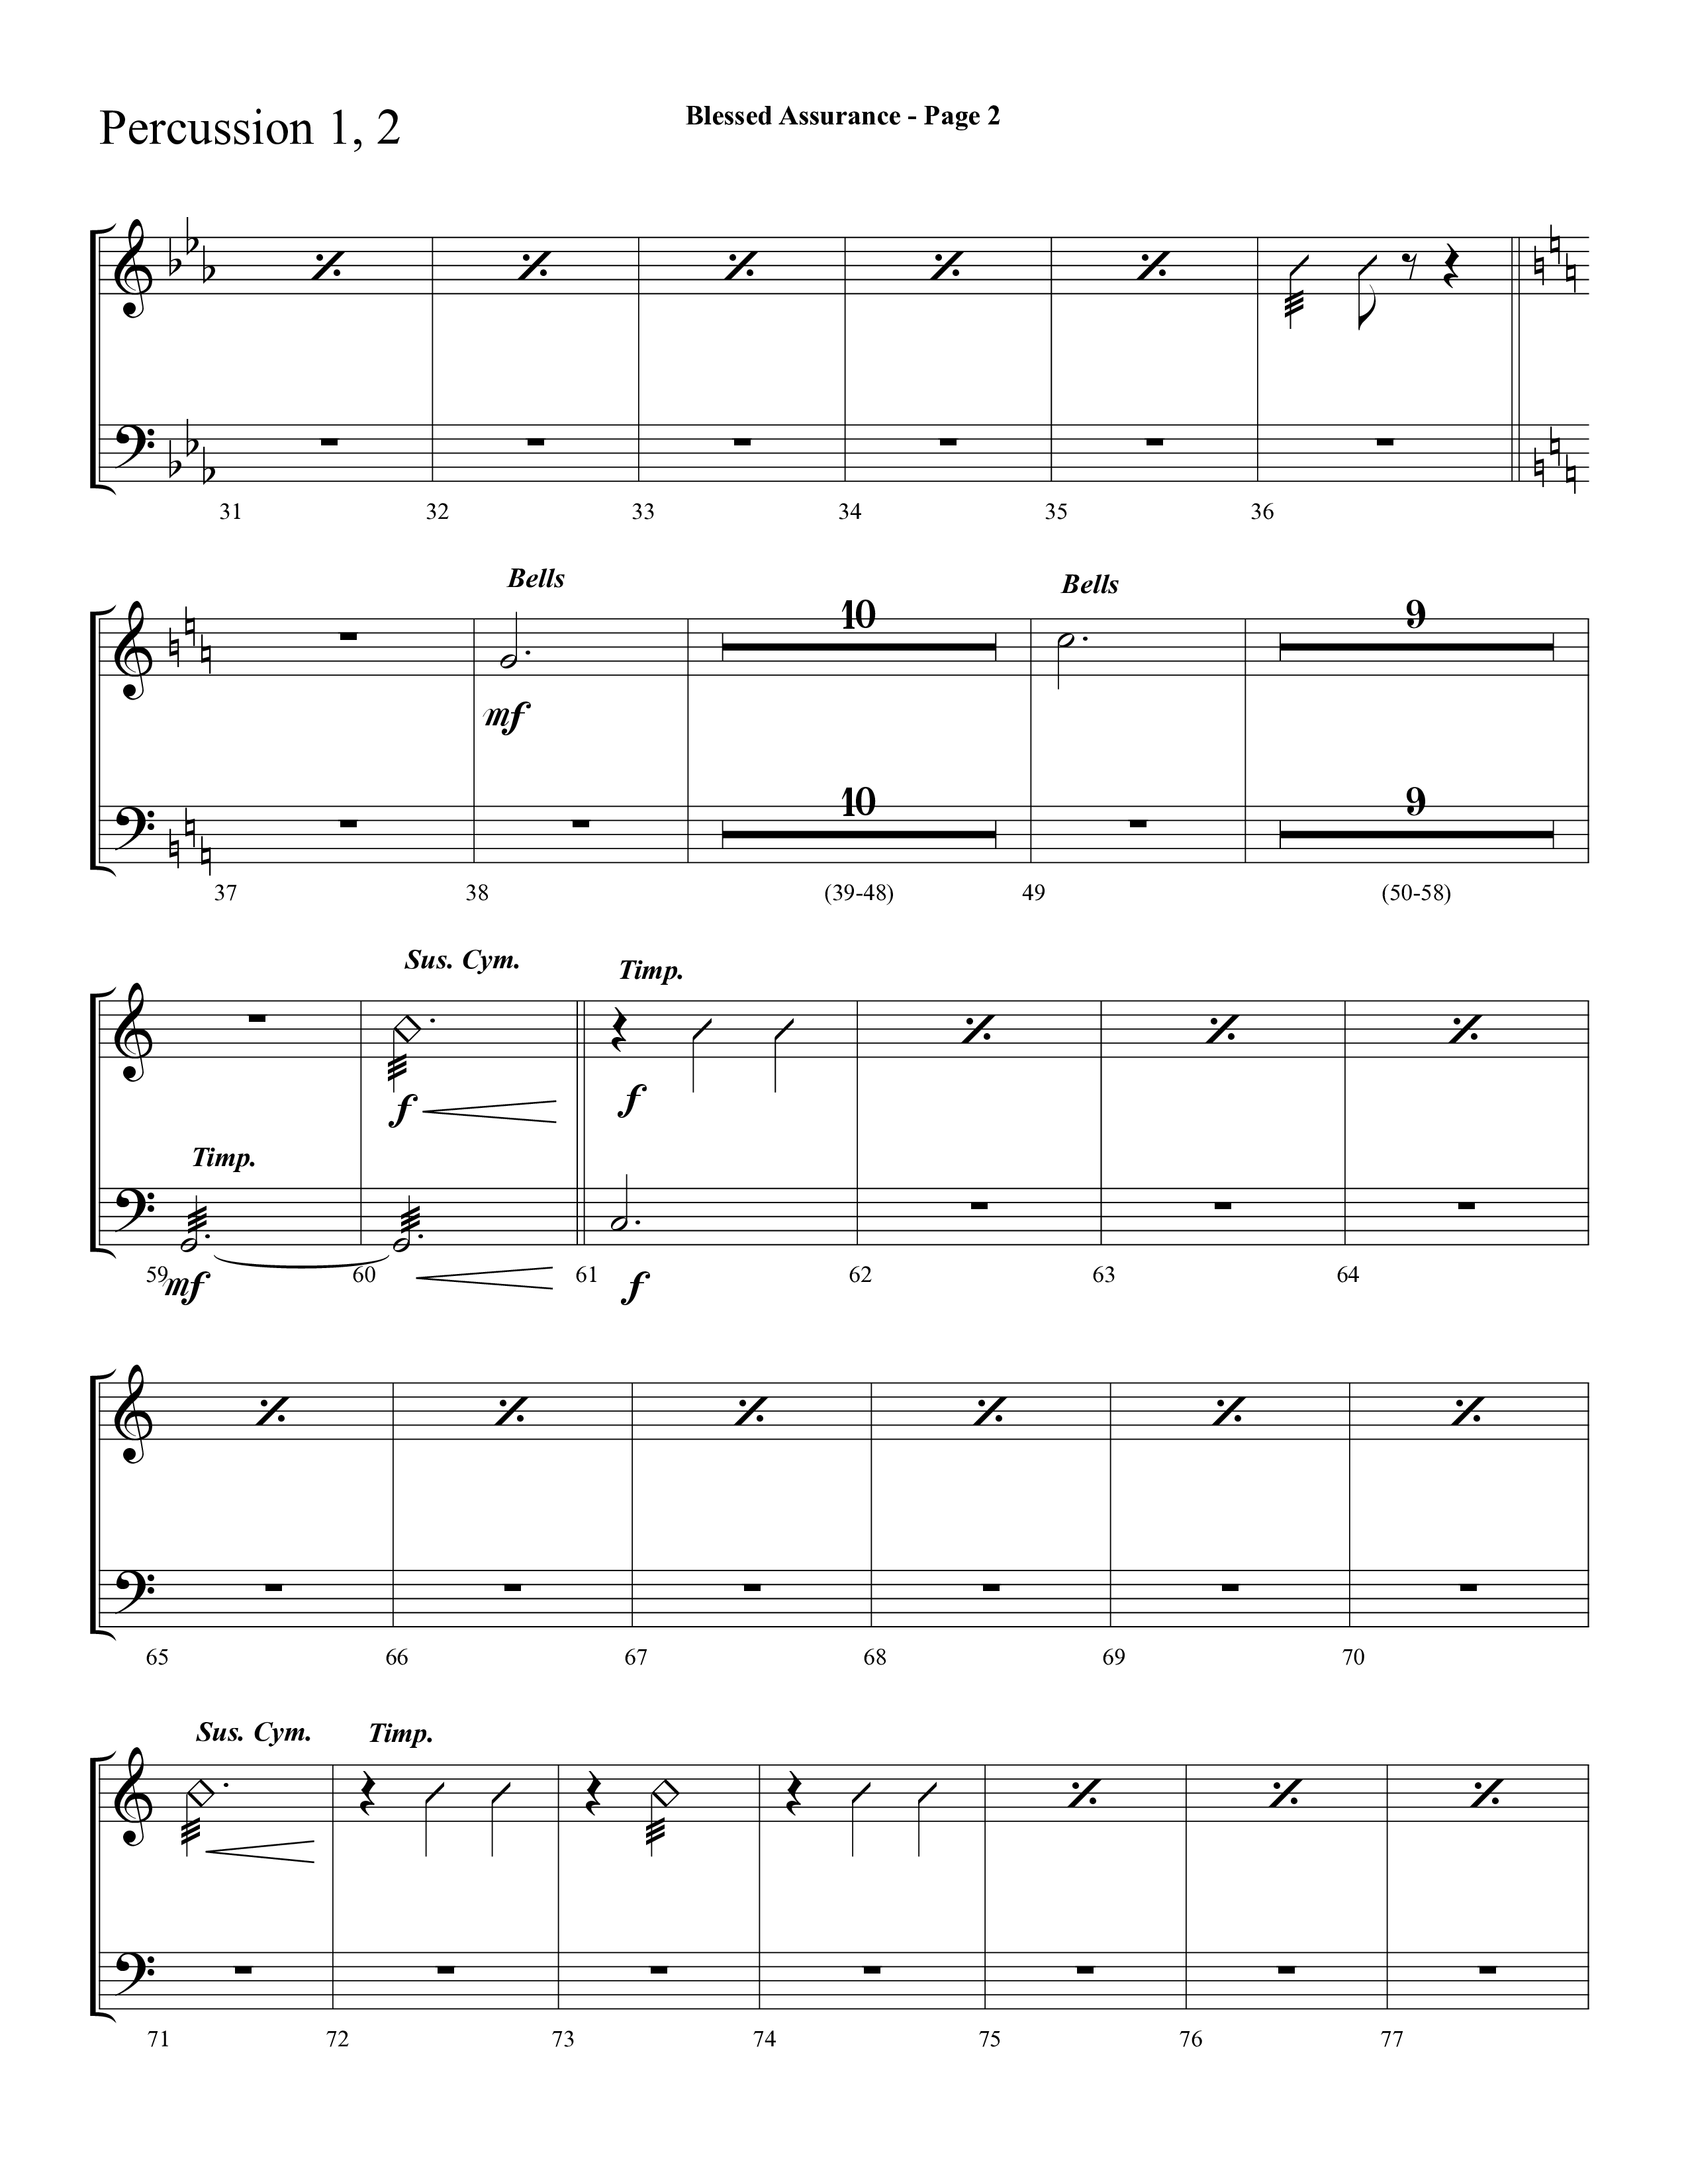 Blessed Assurance (Choral Anthem SATB) Percussion 1/2 (Lifeway Choral / Arr. Dave Williamson)